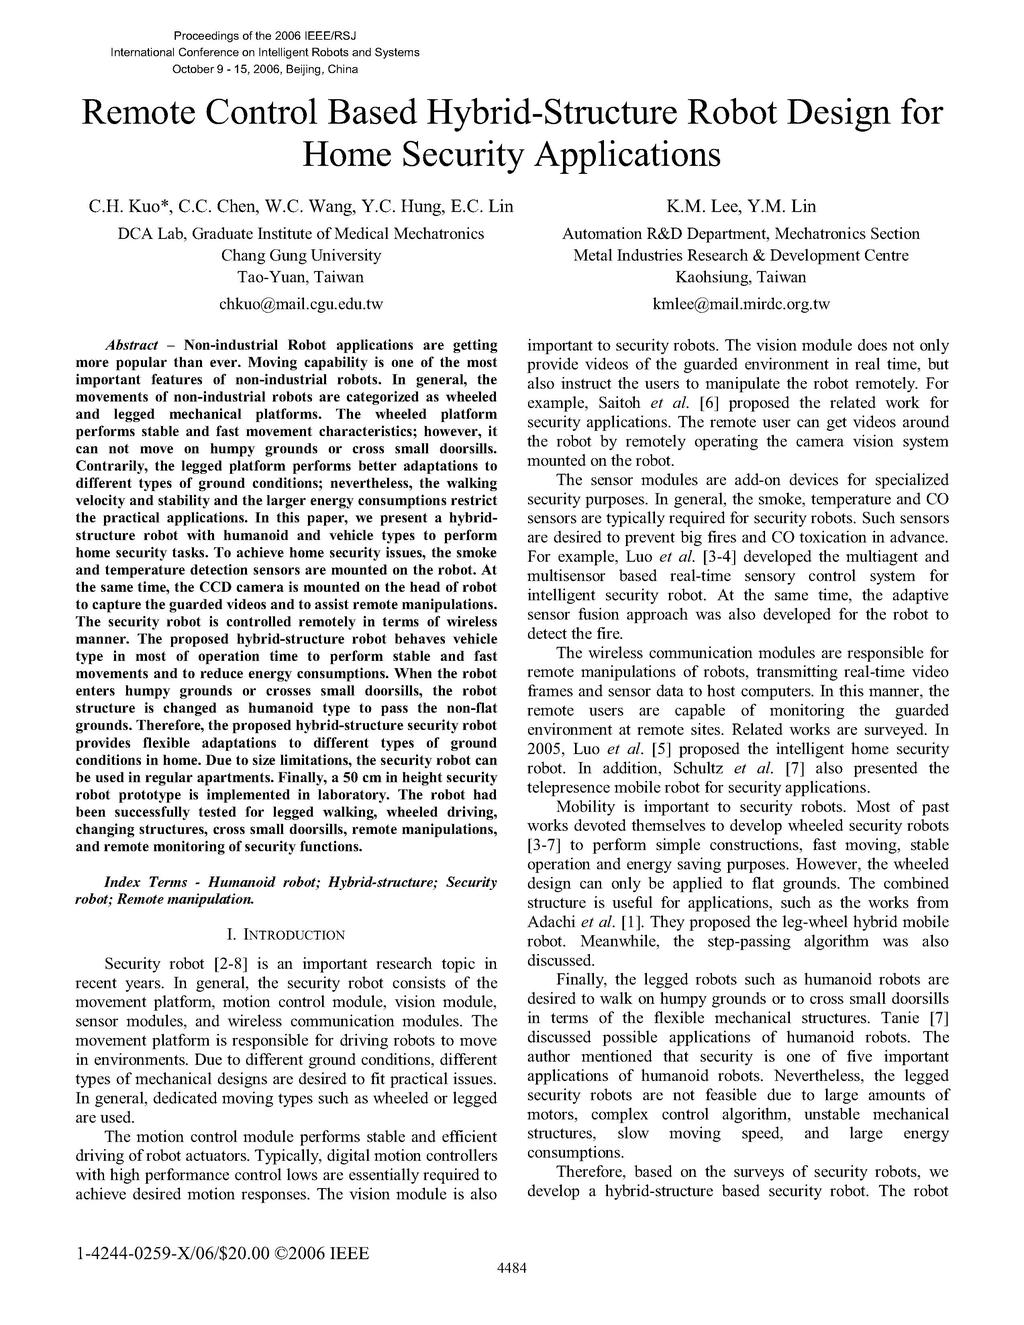 Proceedings of the 2006 IEEE/RSJ International Conference on Intelligent Robots and Systems October 9-15, 2006, Beijing, China Remote Control Based Hybrid-Structure Robot Design for Home Security